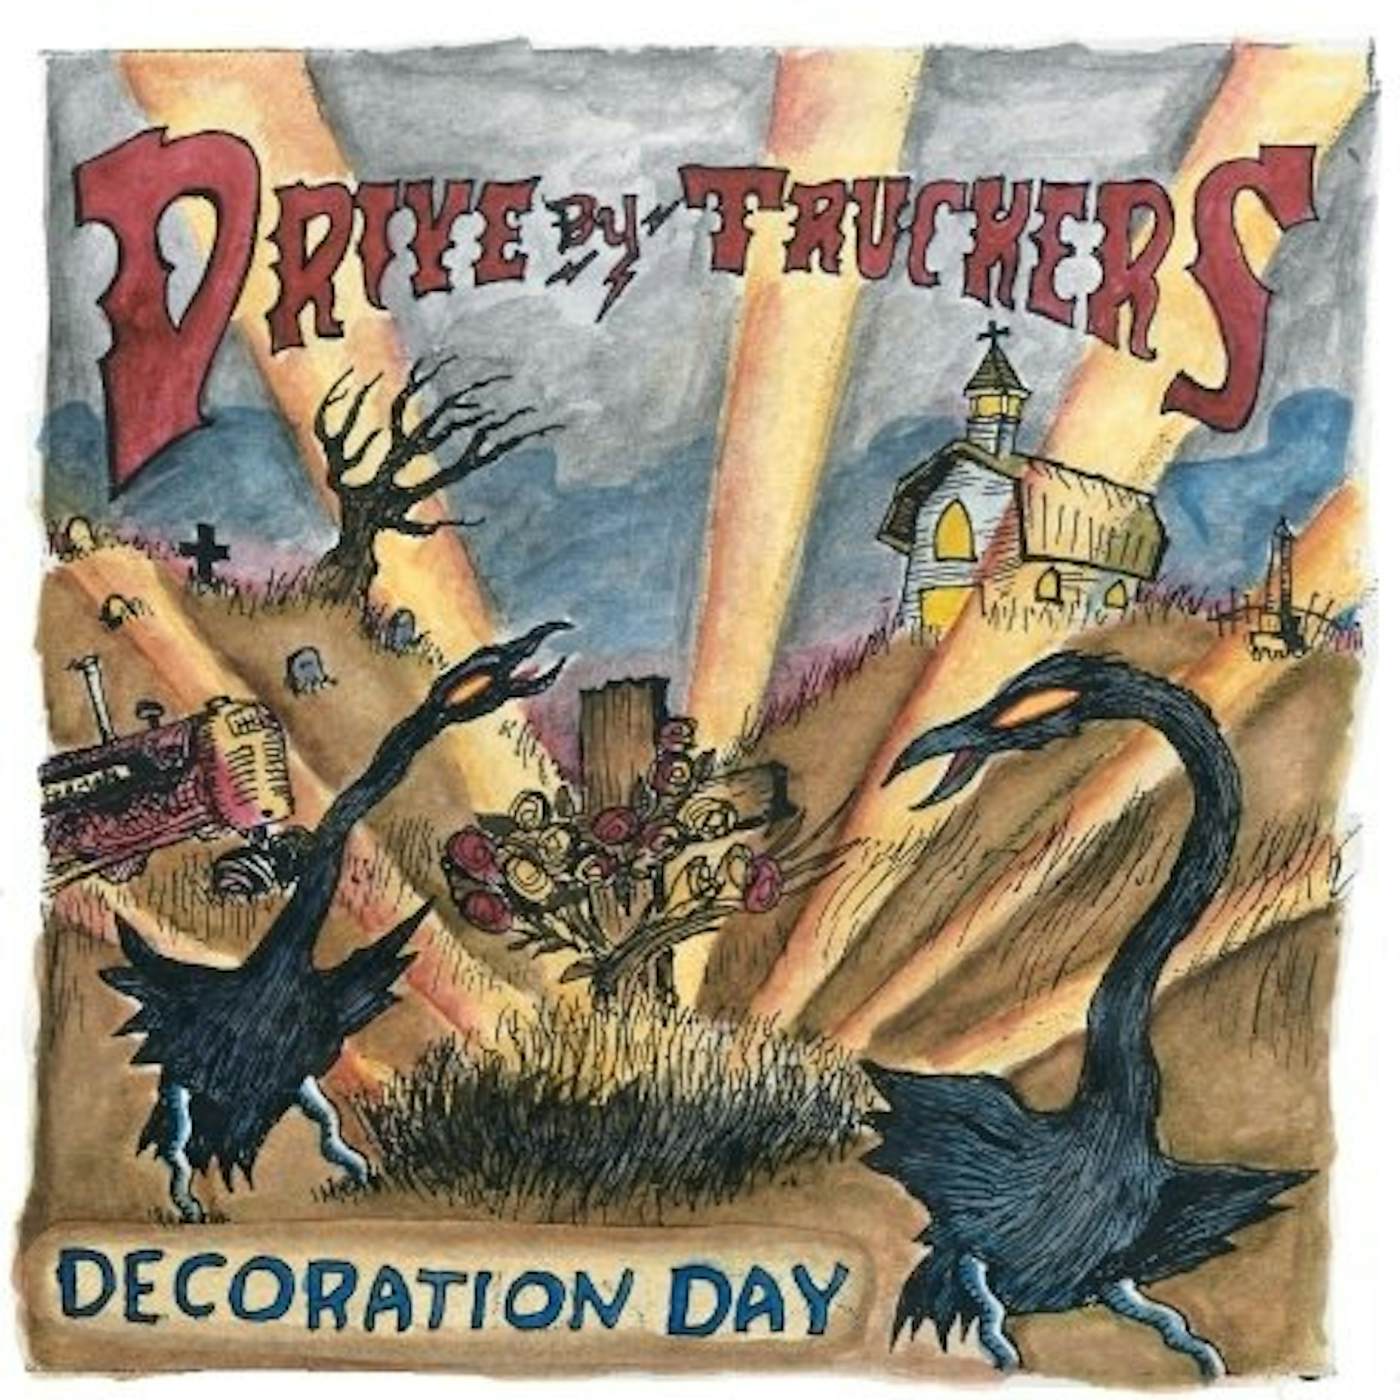 Drive-By Truckers Decoration Day Vinyl Record